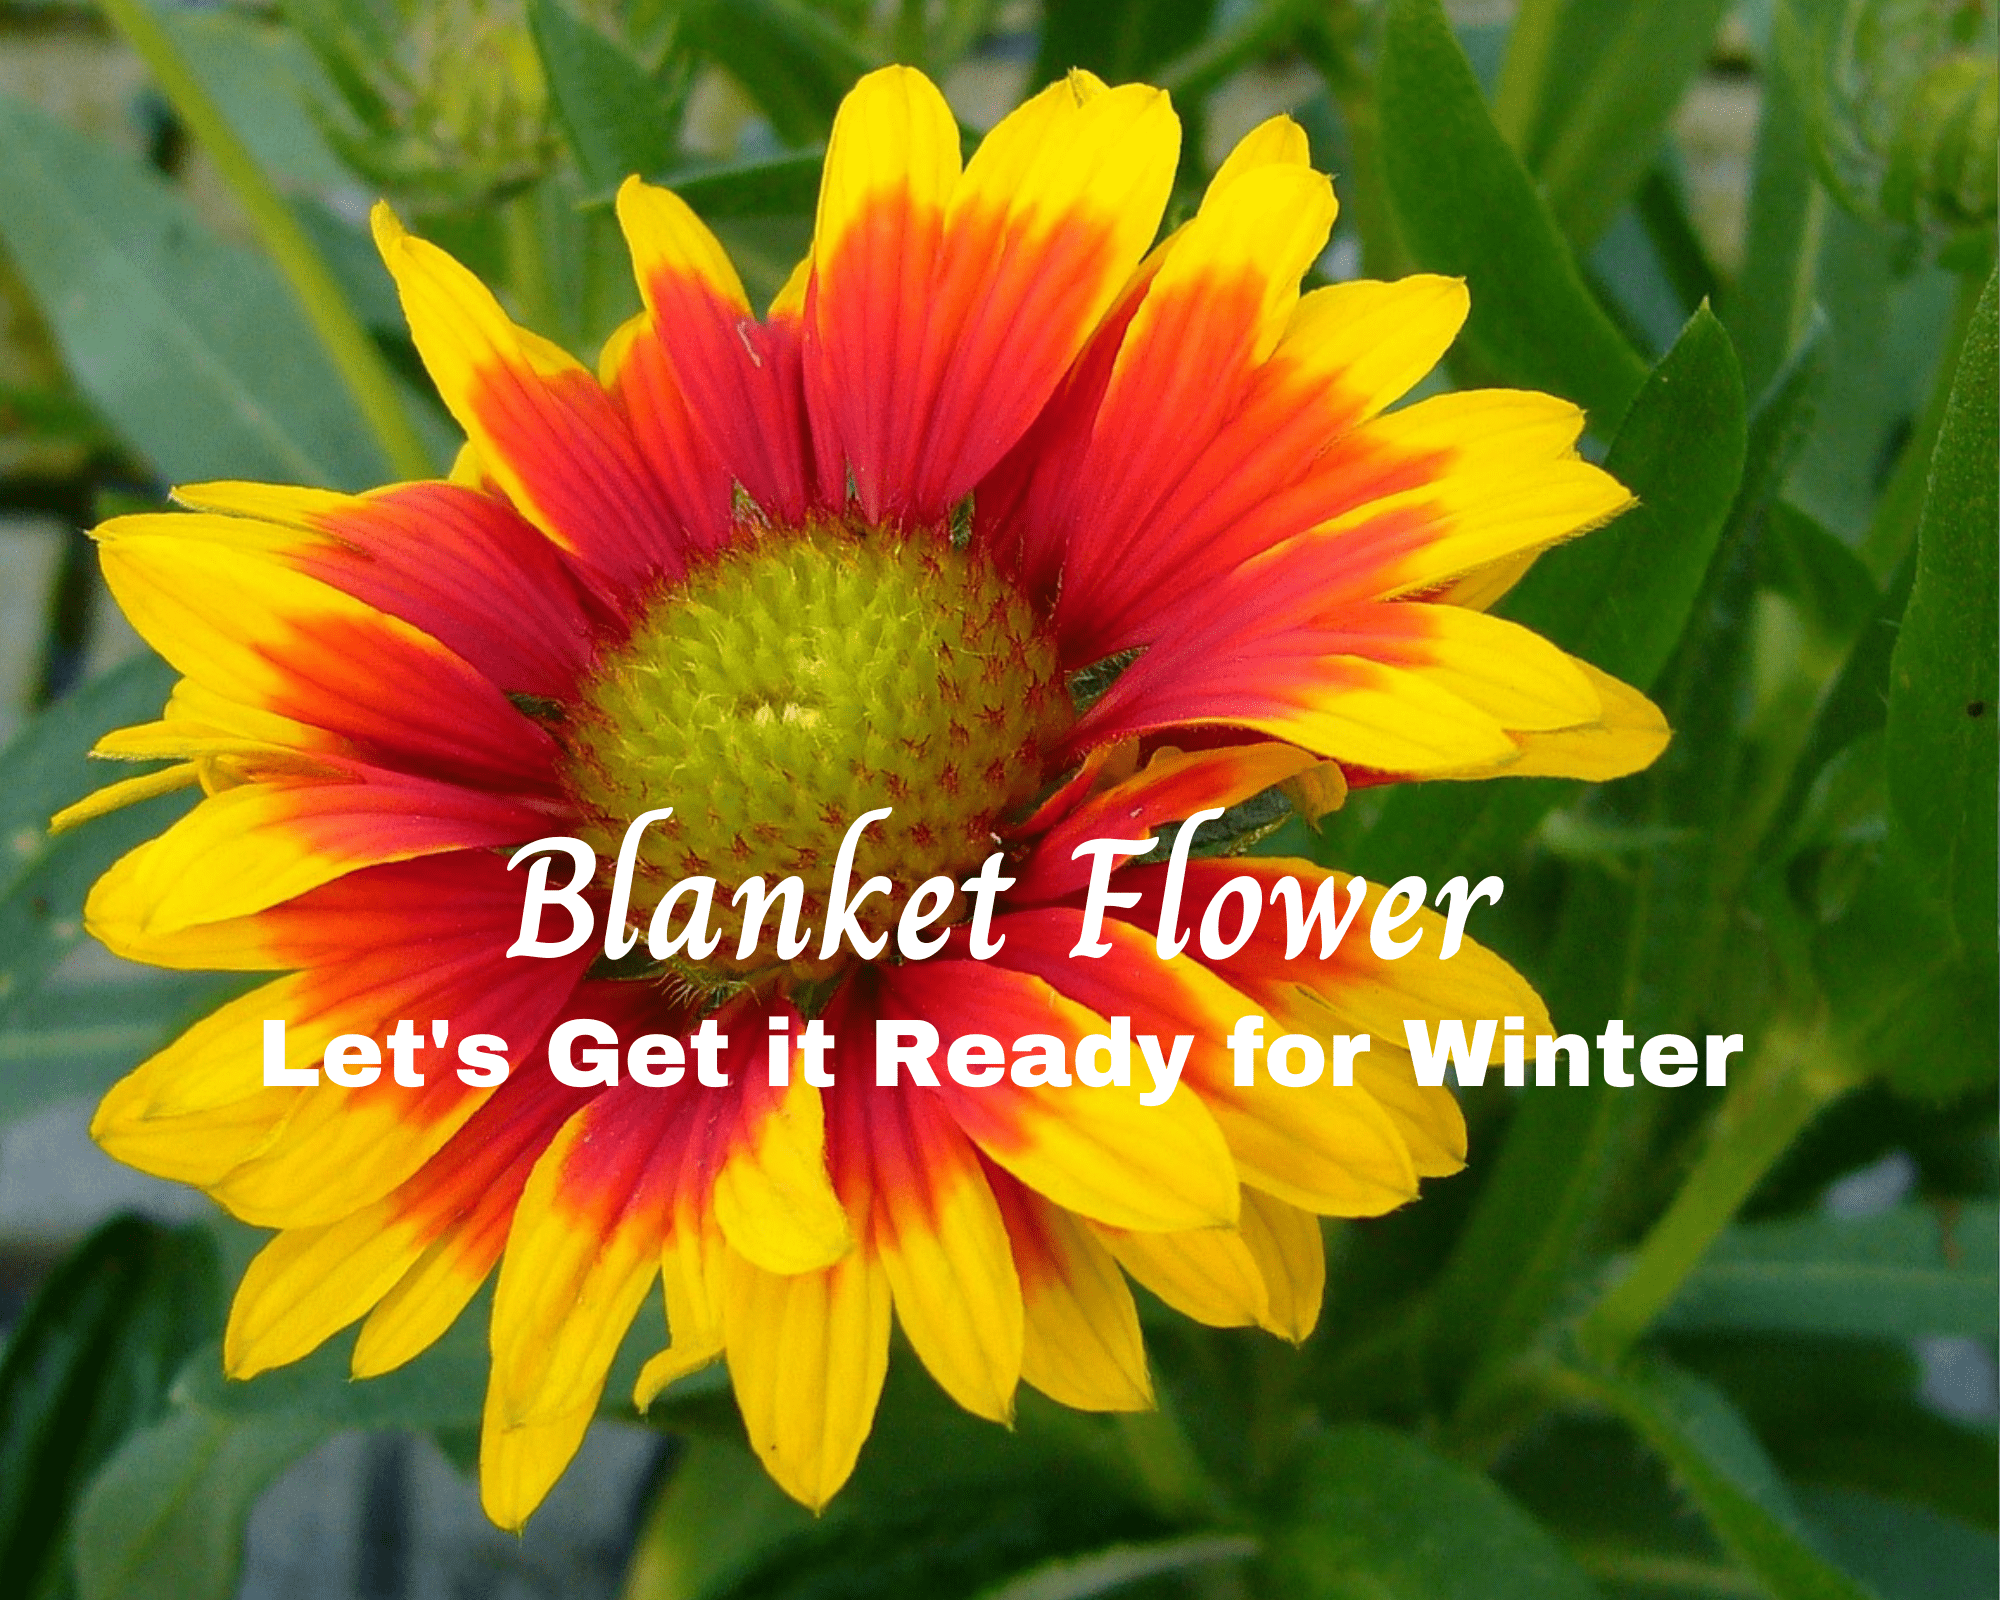 how to get blanket flower ready for winter